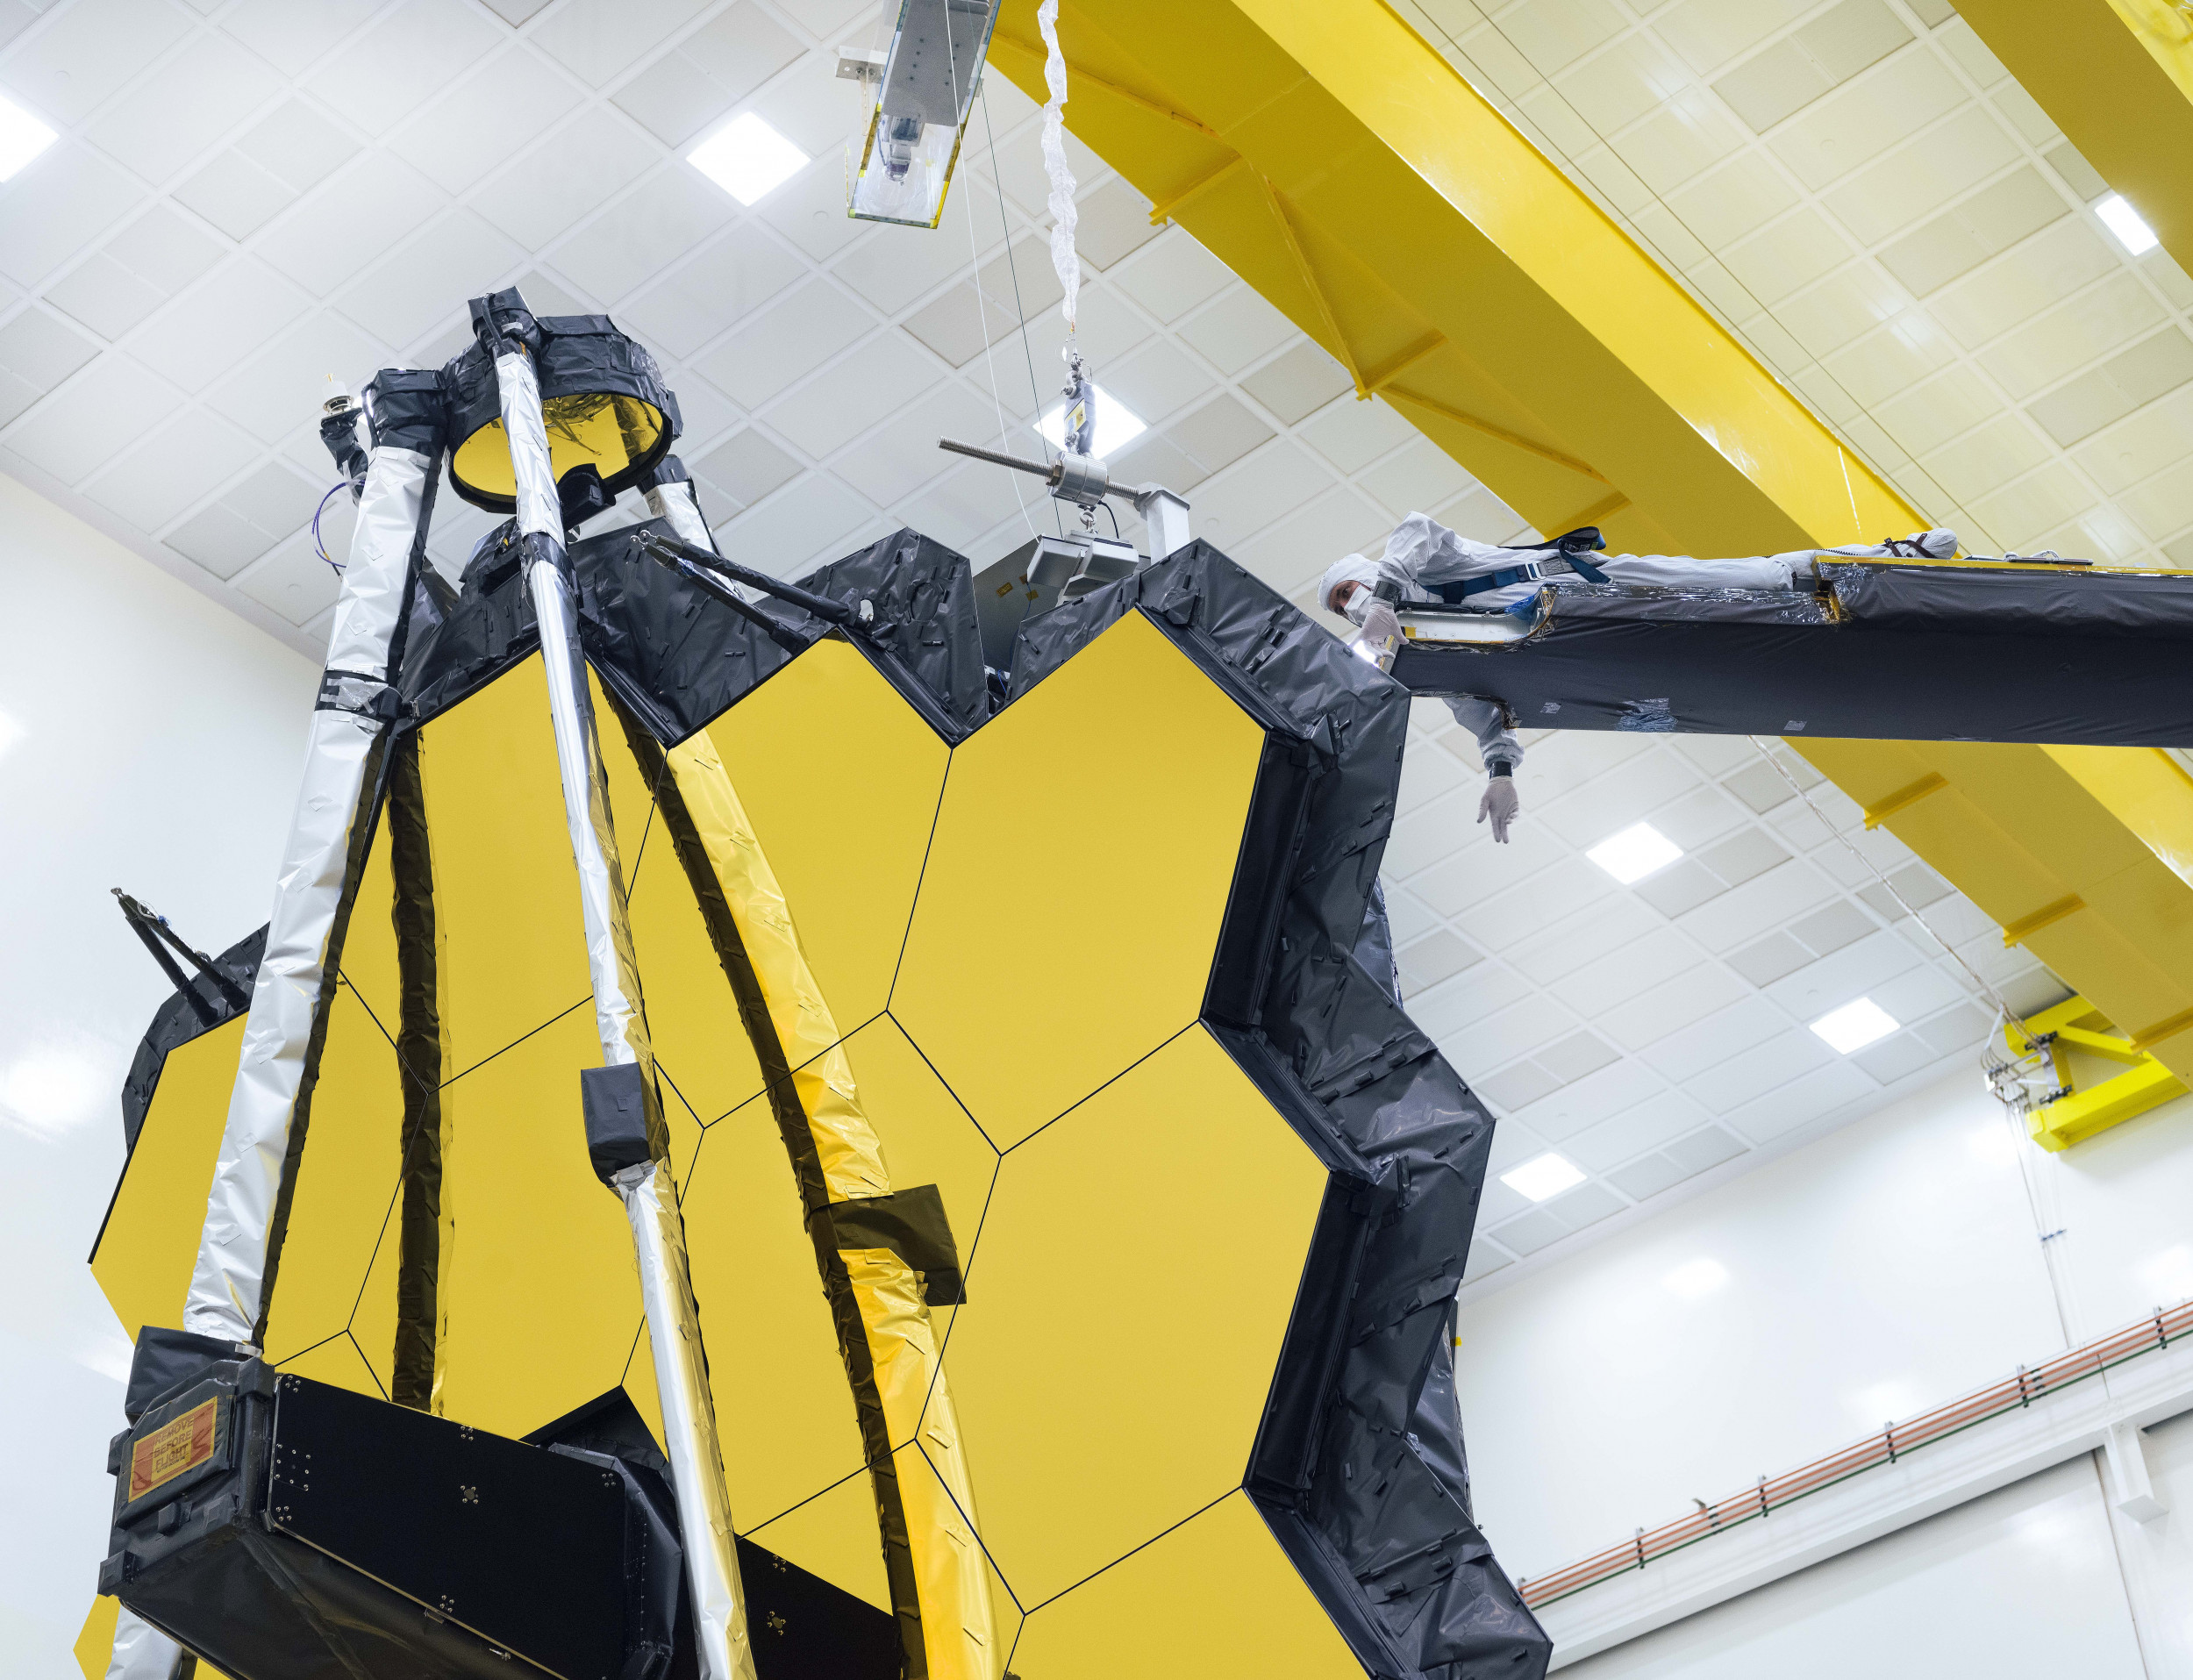 NASA's James Webb Telescope Opens Mirror on Earth for Last Time Before